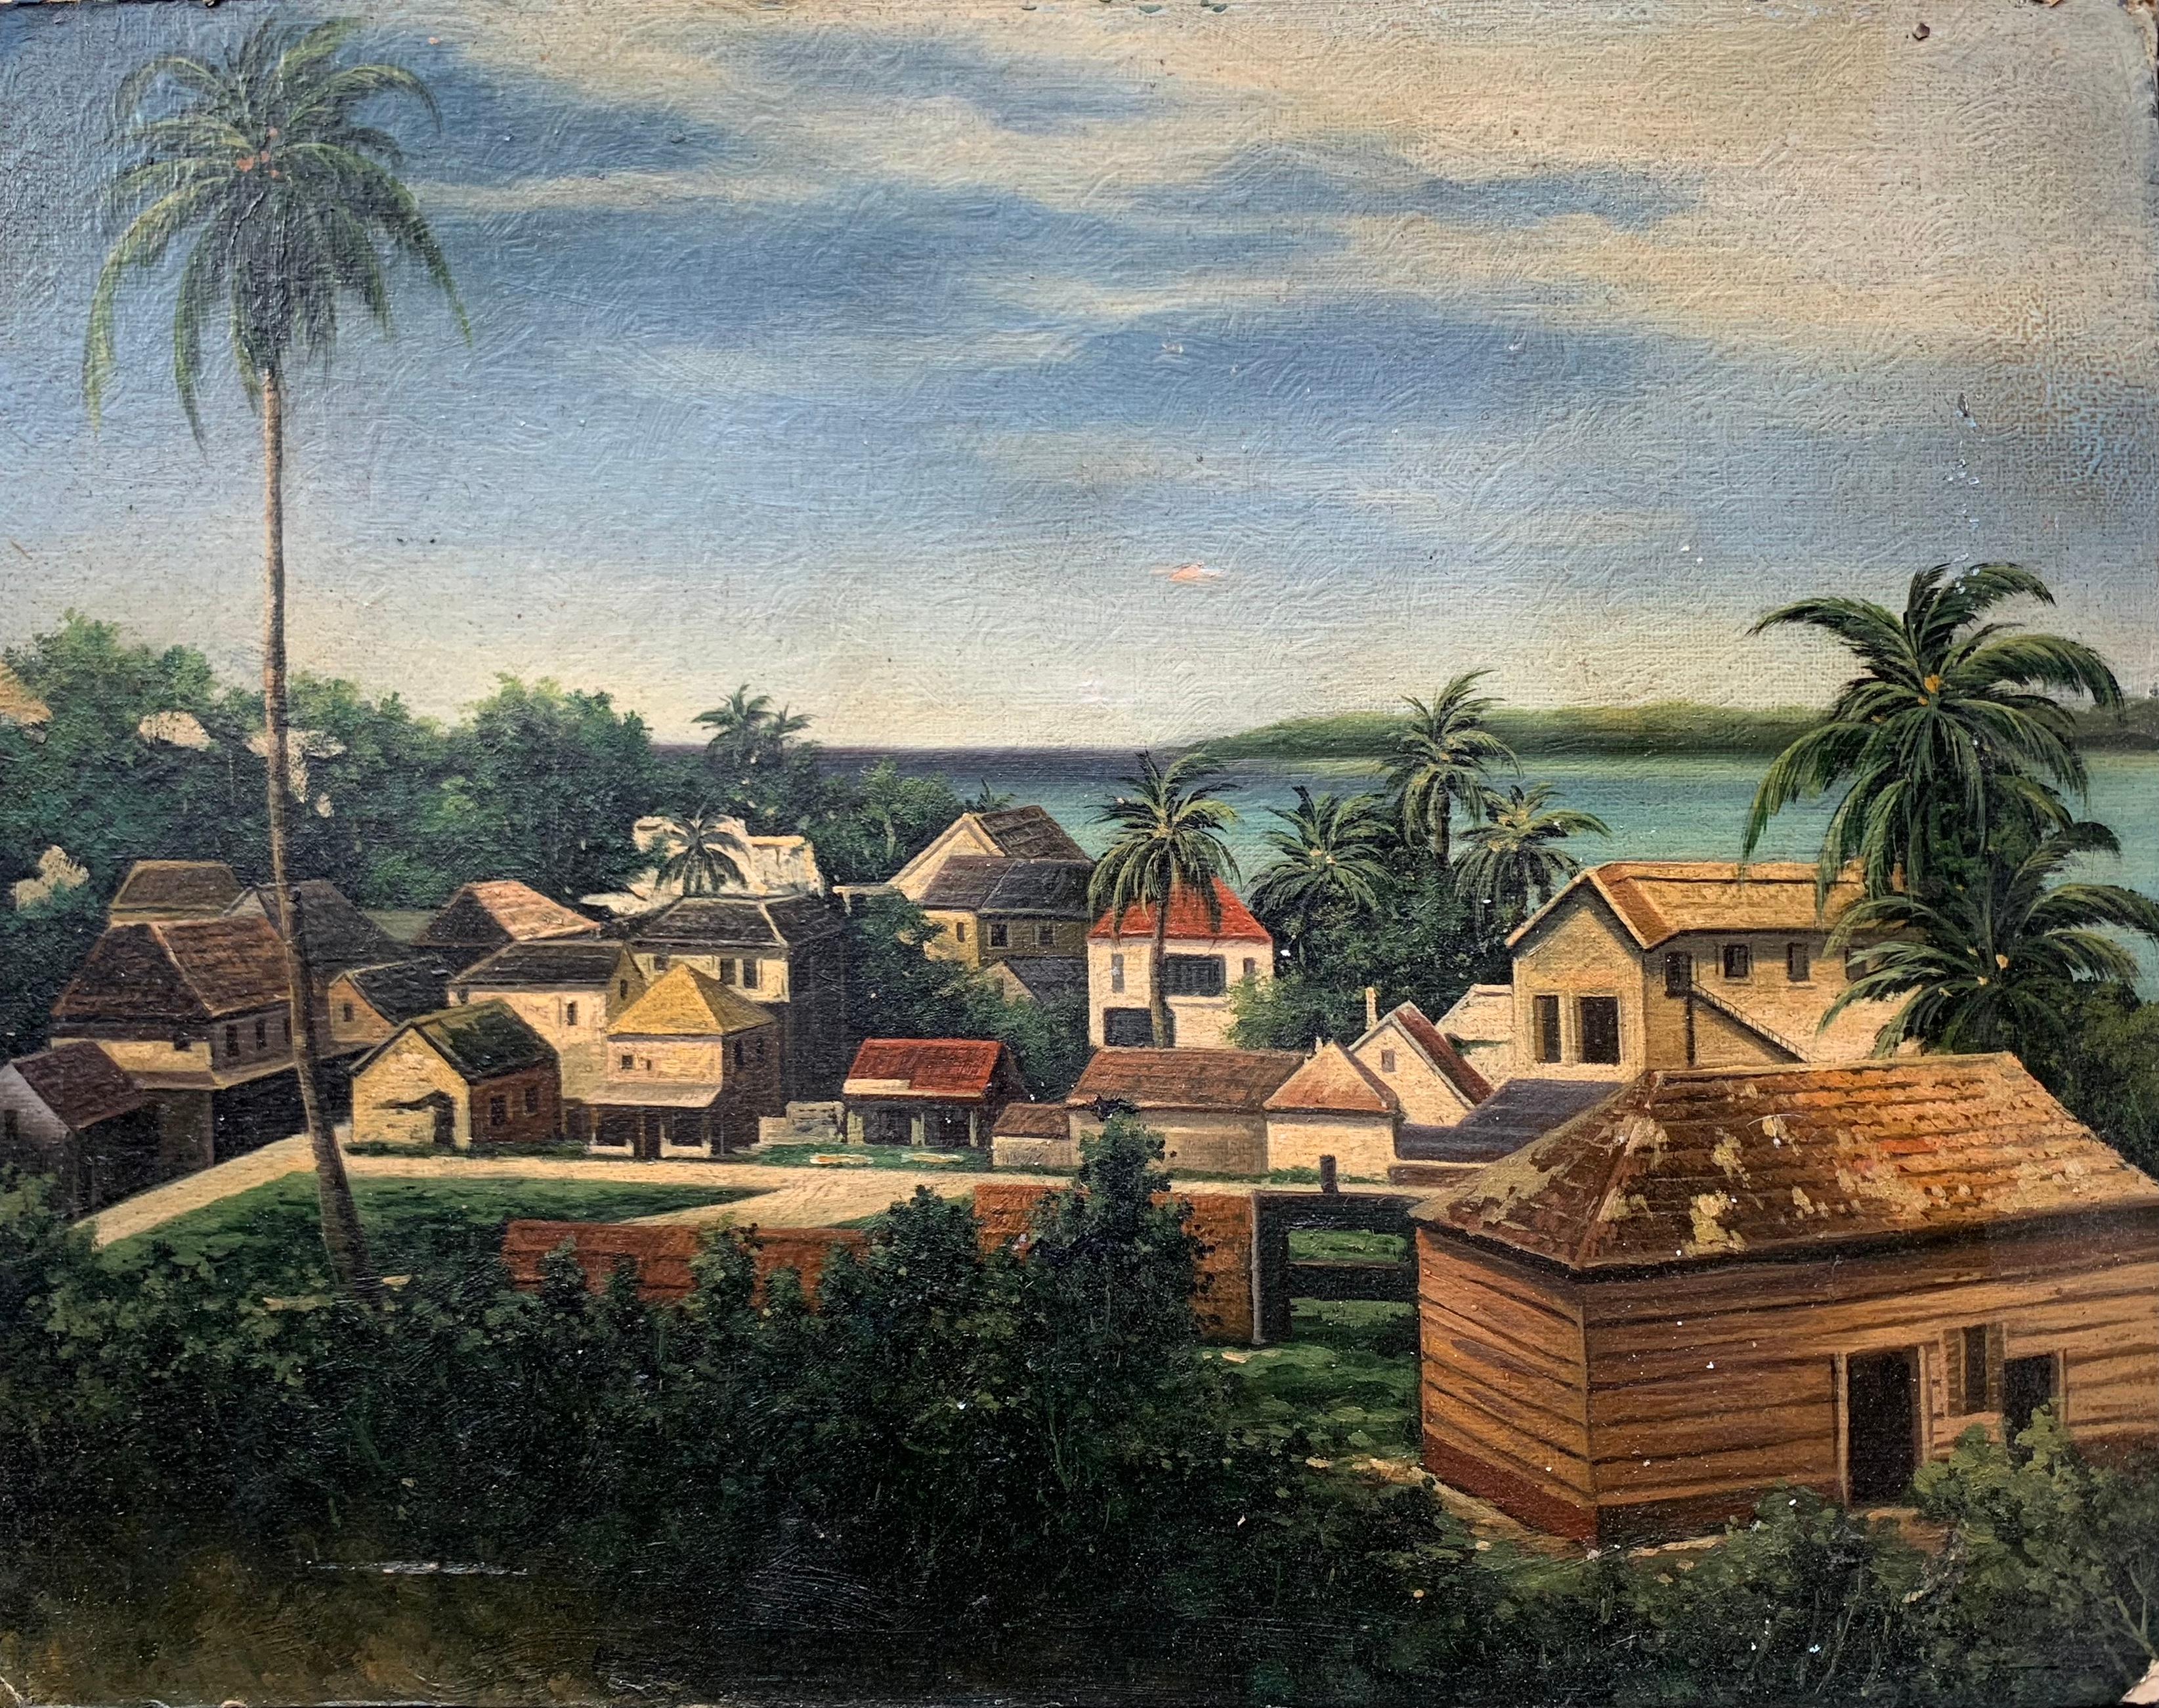 Bermuda Landscape - Painting by Will Howe Foote